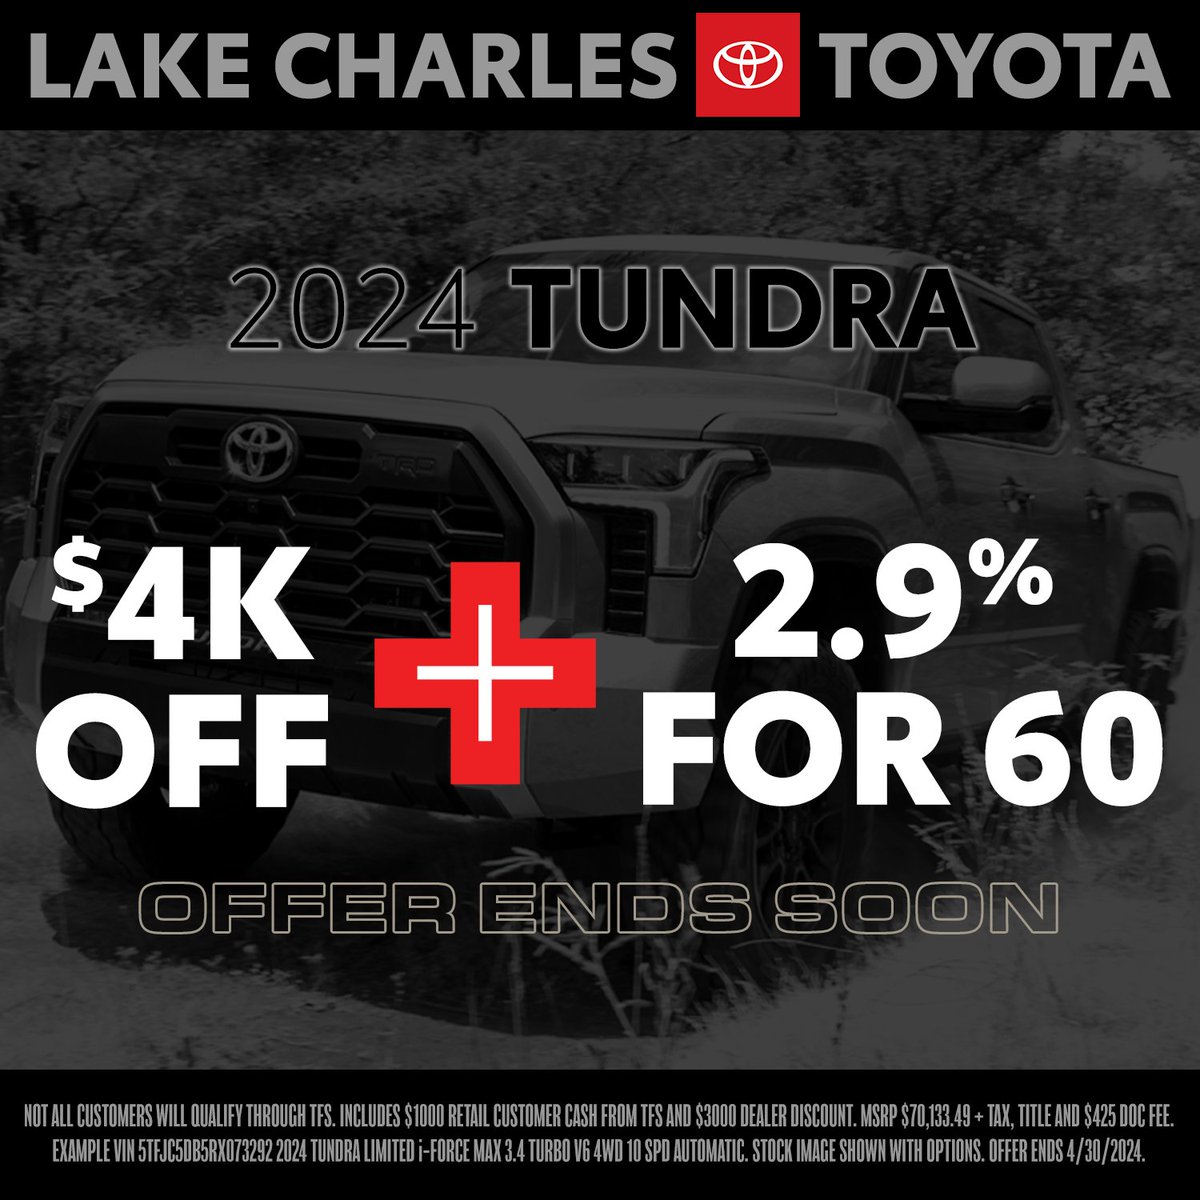 Time is running out to take advantage of this incredible Tundra offer. We still have lots of trucks to choose from so shop us online or in person and end April with a brand-new Toyota Tundra in your driveway! #RaiseYourExpectations
smartpath.lakecharlestoyota.com/inventory/sear…